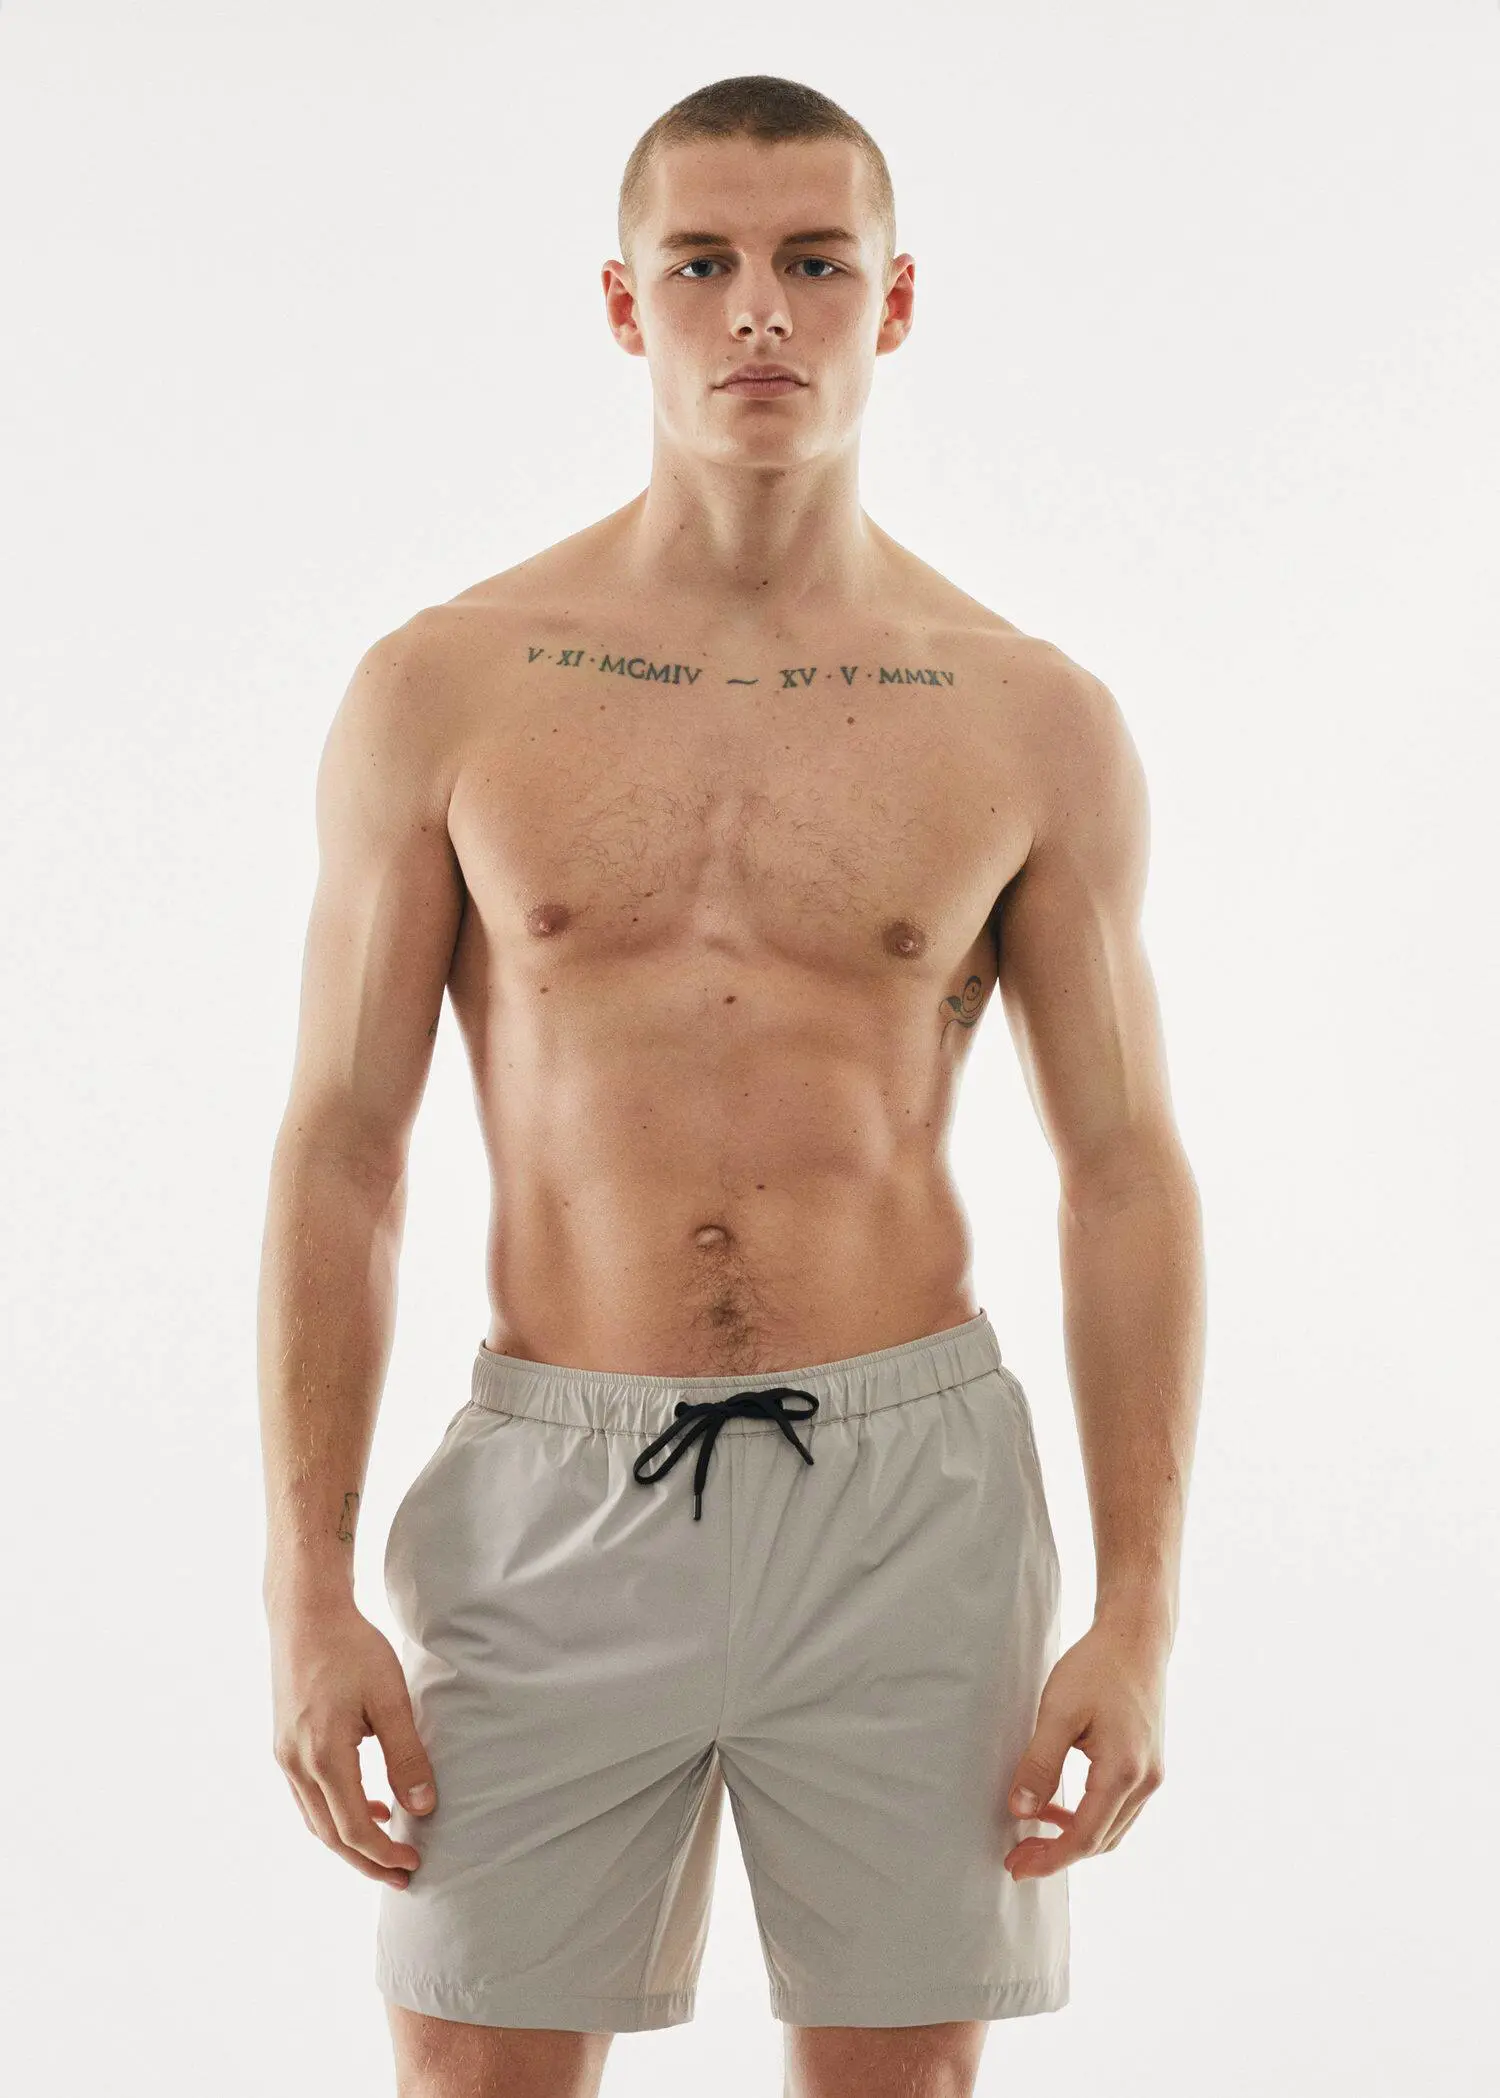 Mango Cord plain swimming trunks. a shirtless man in white shorts standing in front of a wall. 